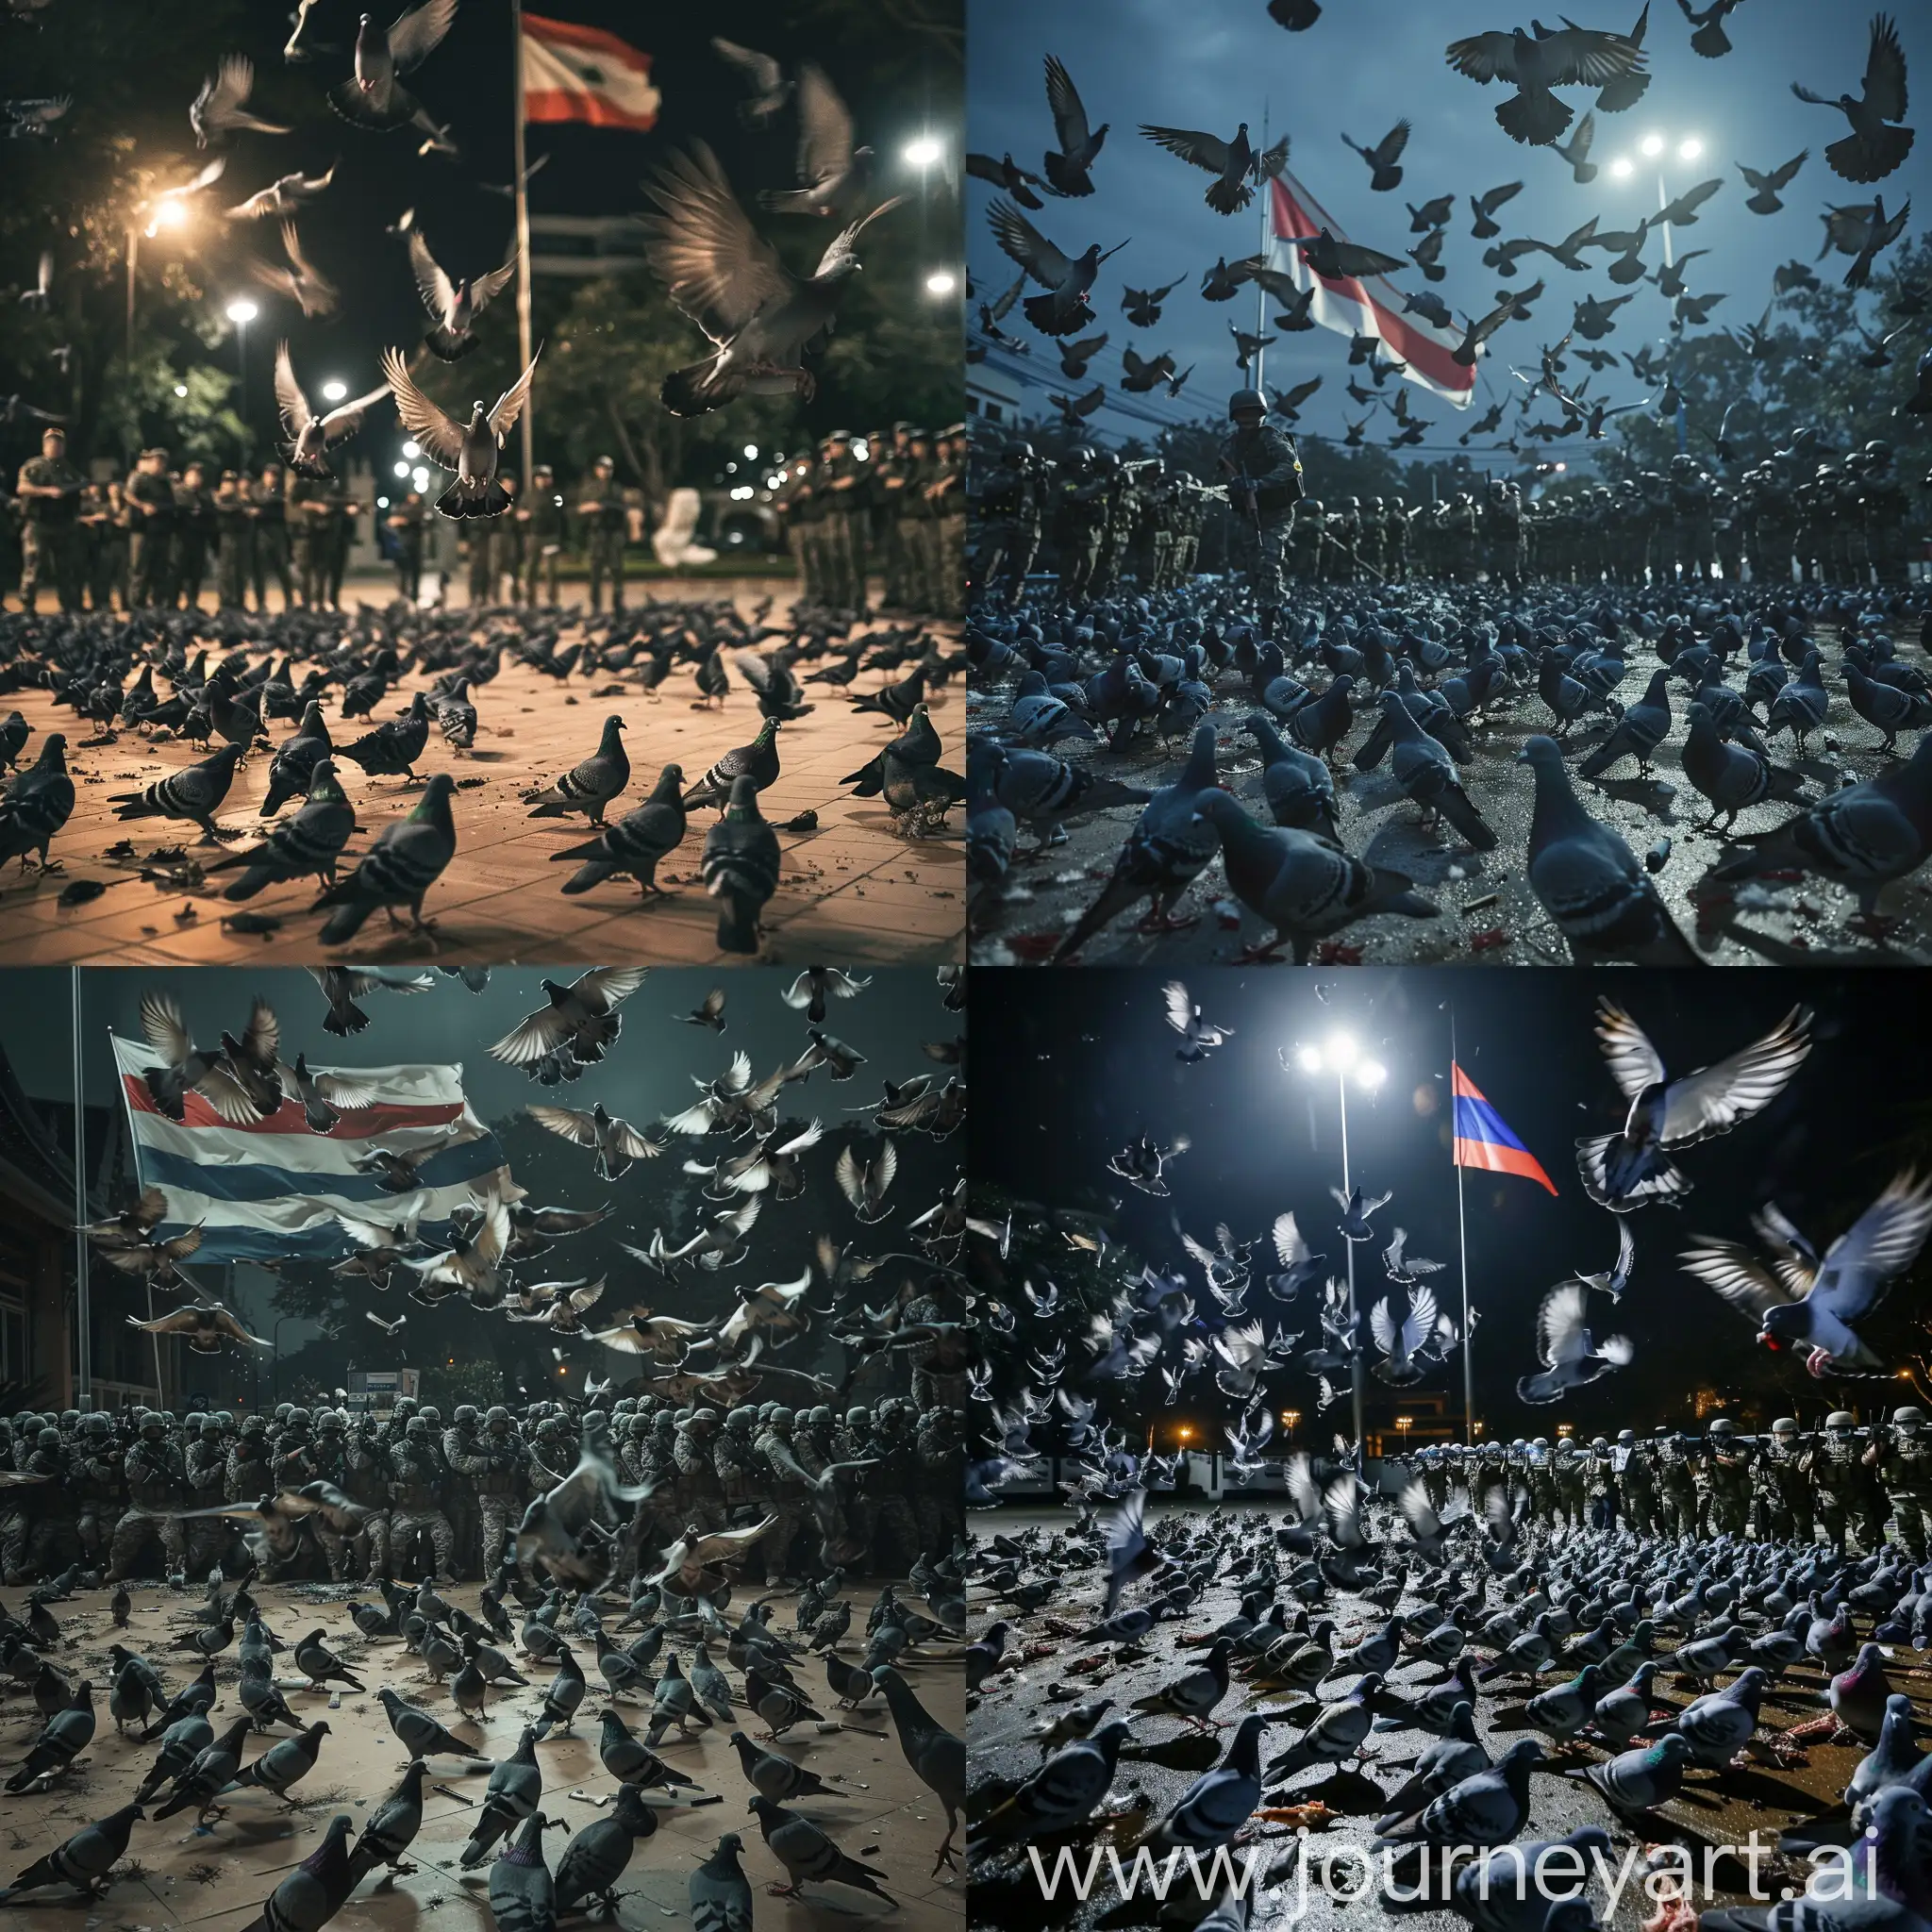 Pigeons flew in large flocks beautifully in the dark sky inside the university with the Thai flag and many Thai soldiers and soldiers and police in uniforms pointing guns at the flock of pigeons and birds dead pigeons  were strewn on the ground